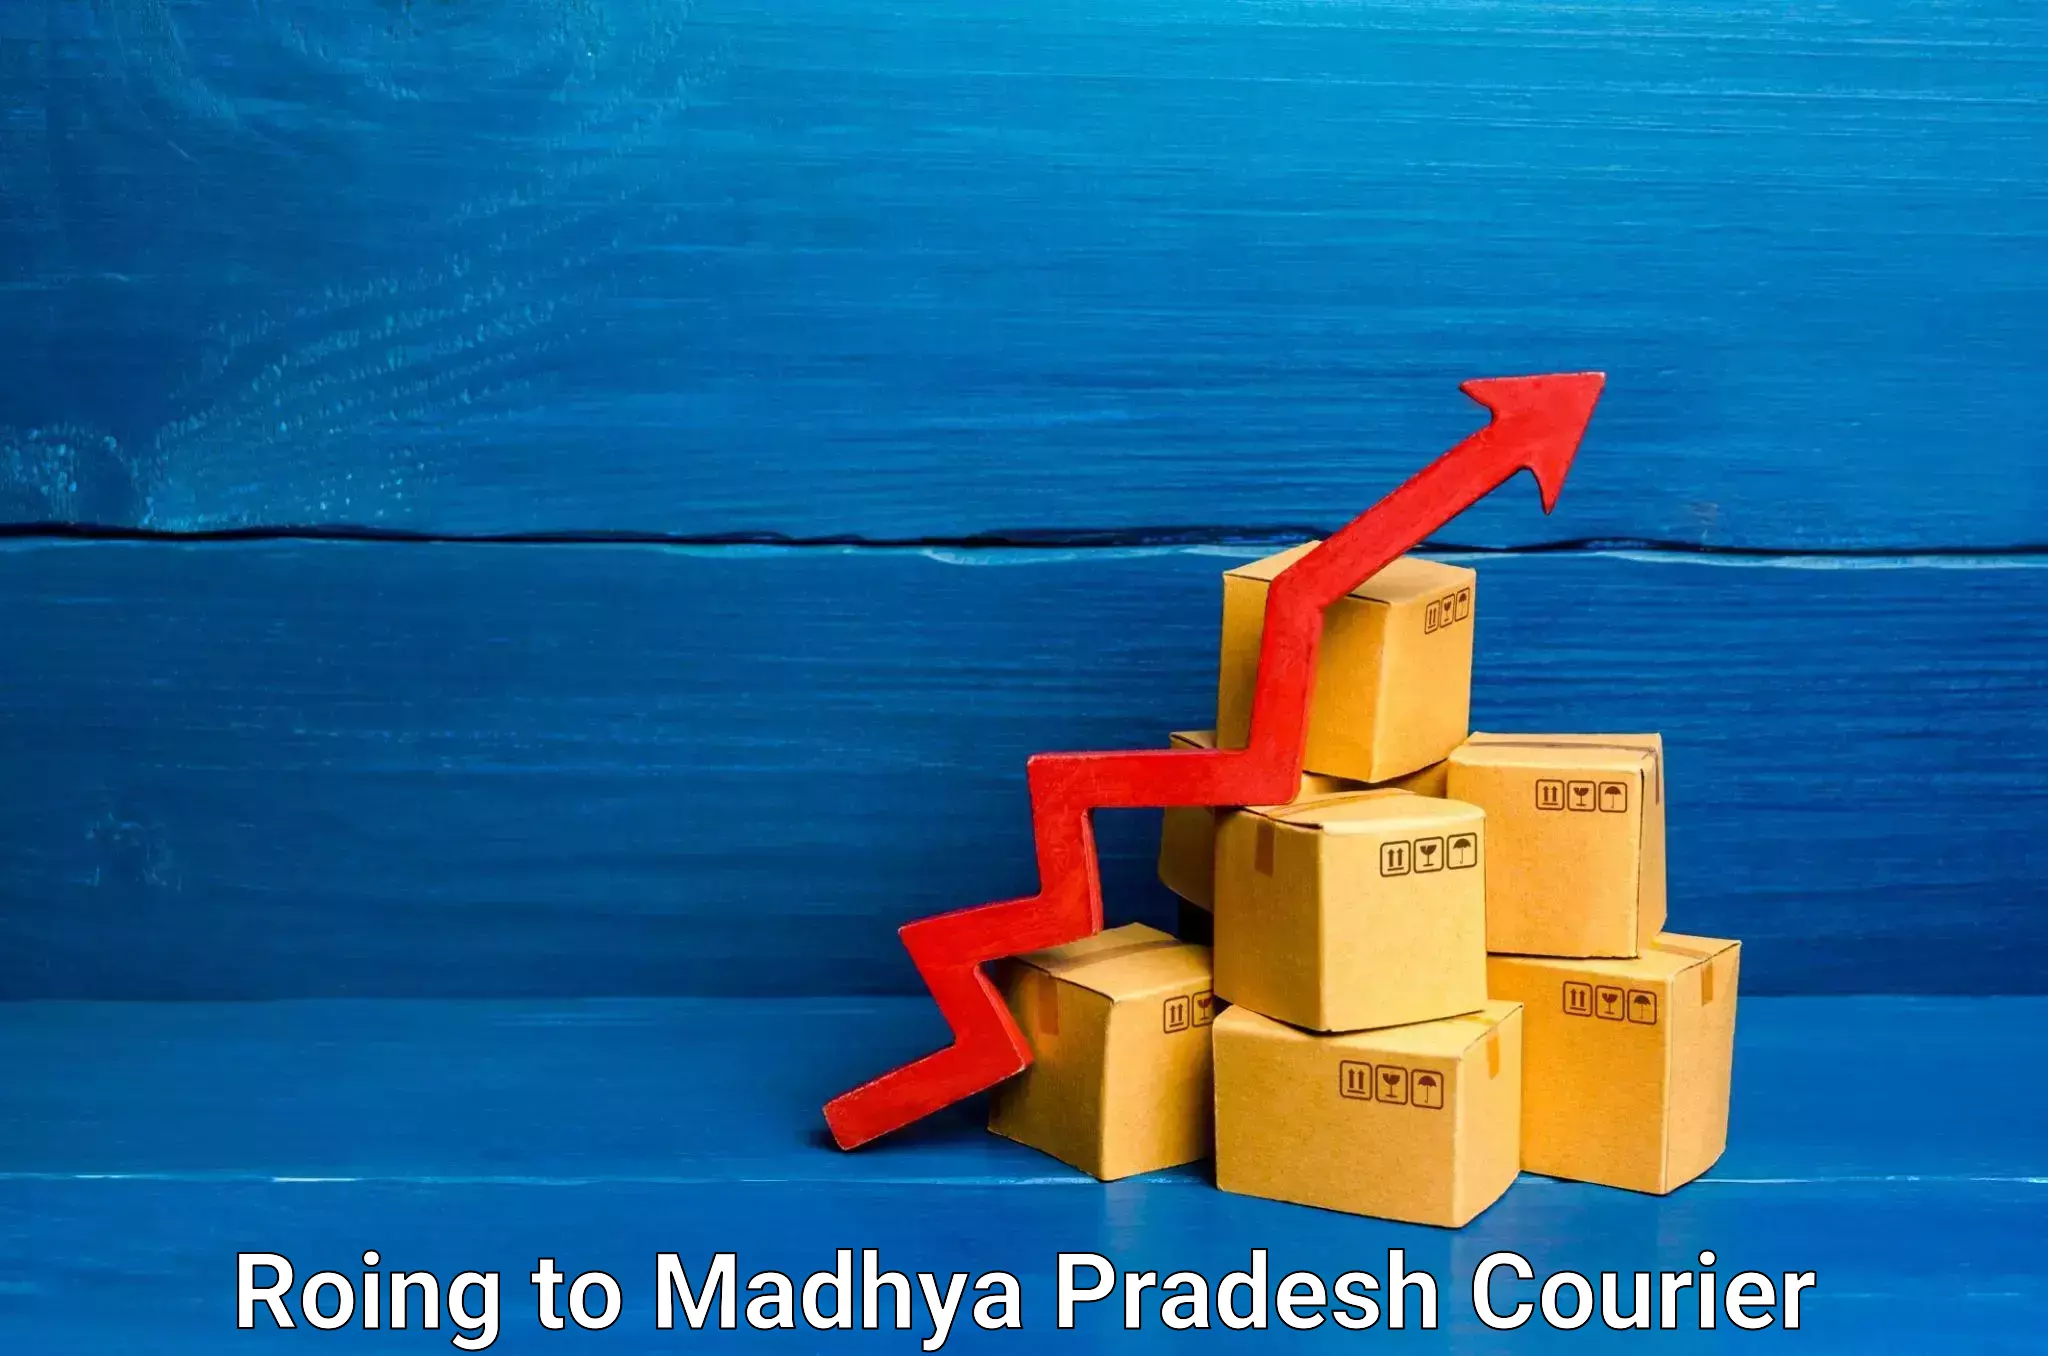 Courier service comparison Roing to Madhya Pradesh